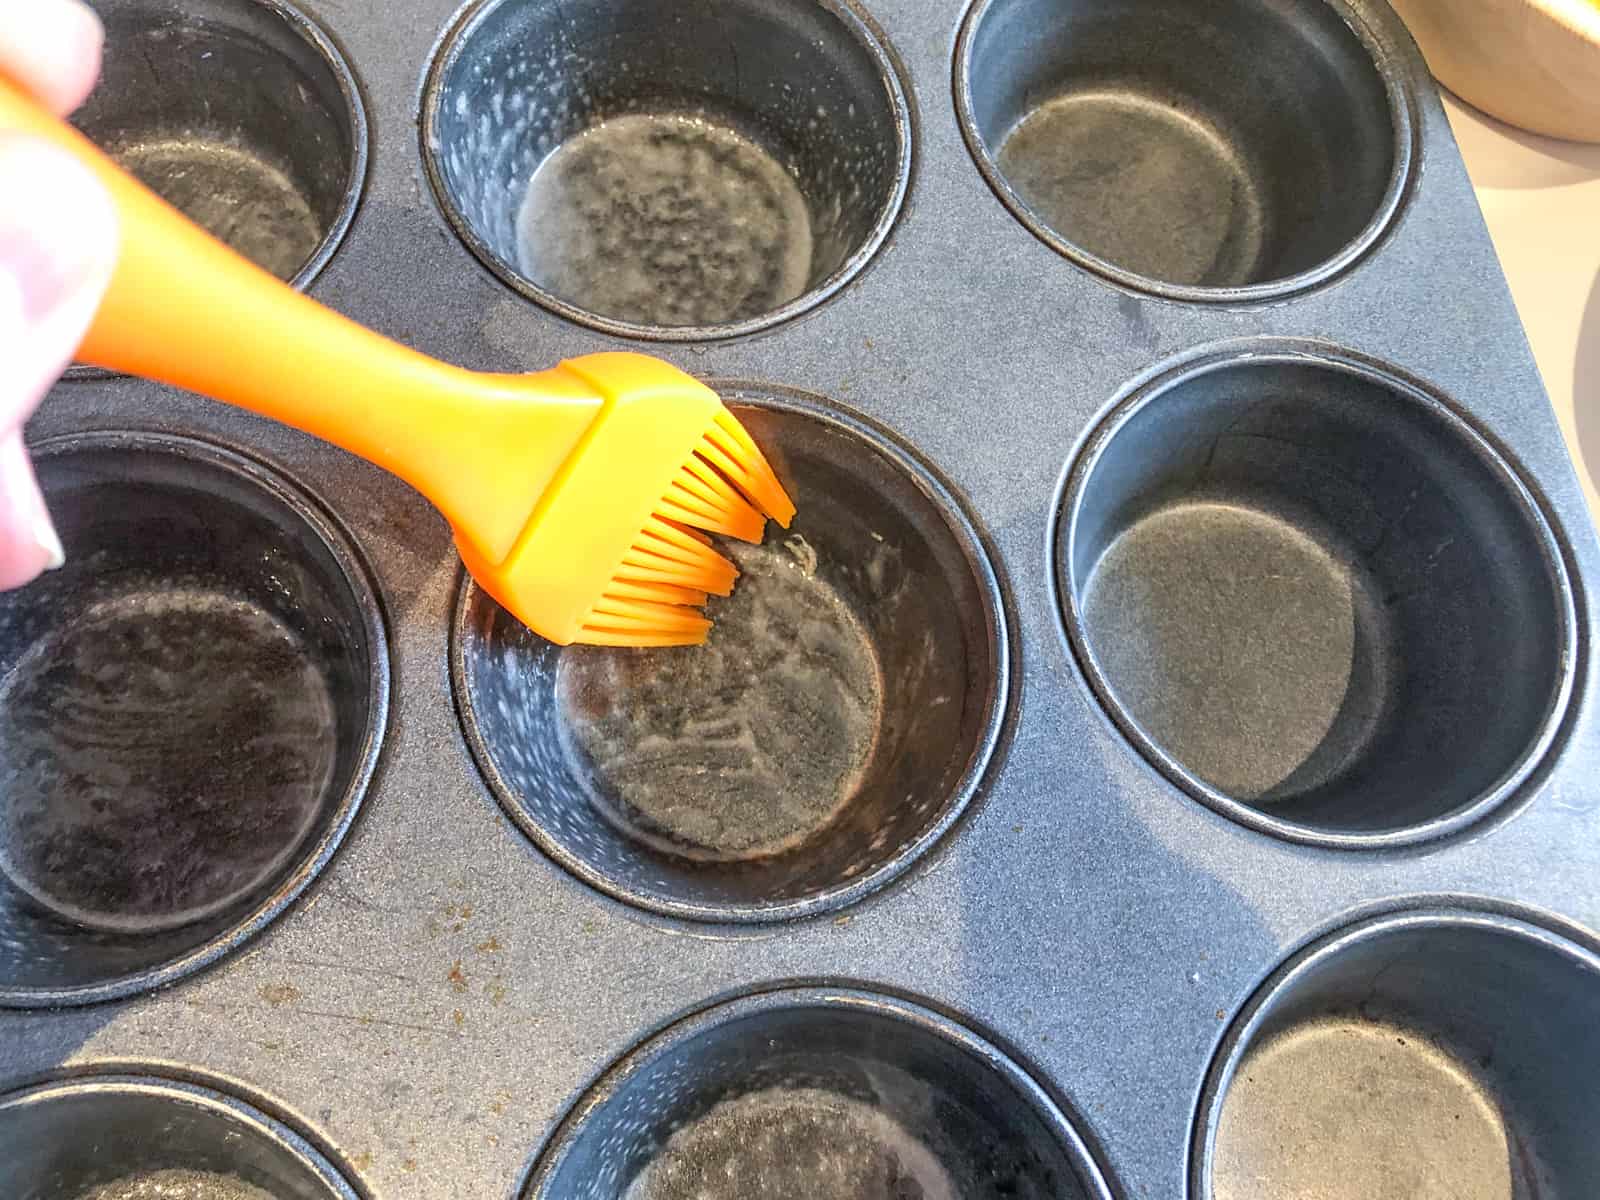 Using a silicone pastry brush to oil a muffin tray.